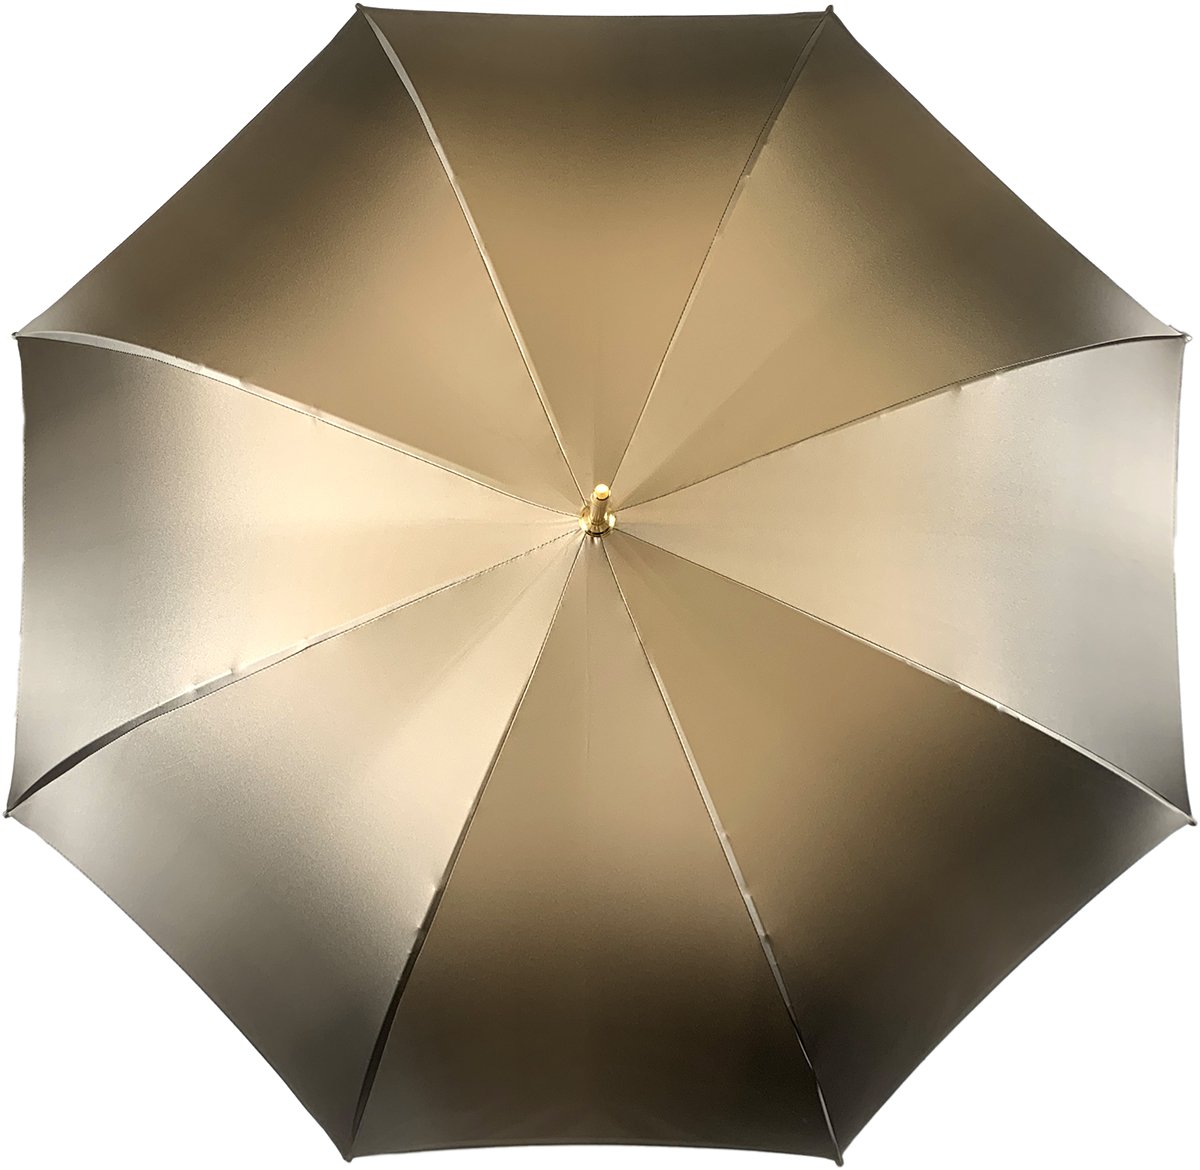 Double Cloth Umbrella In A Fantastic Chocolate Color - IL MARCHESATO LUXURY UMBRELLAS, CANES AND SHOEHORNS